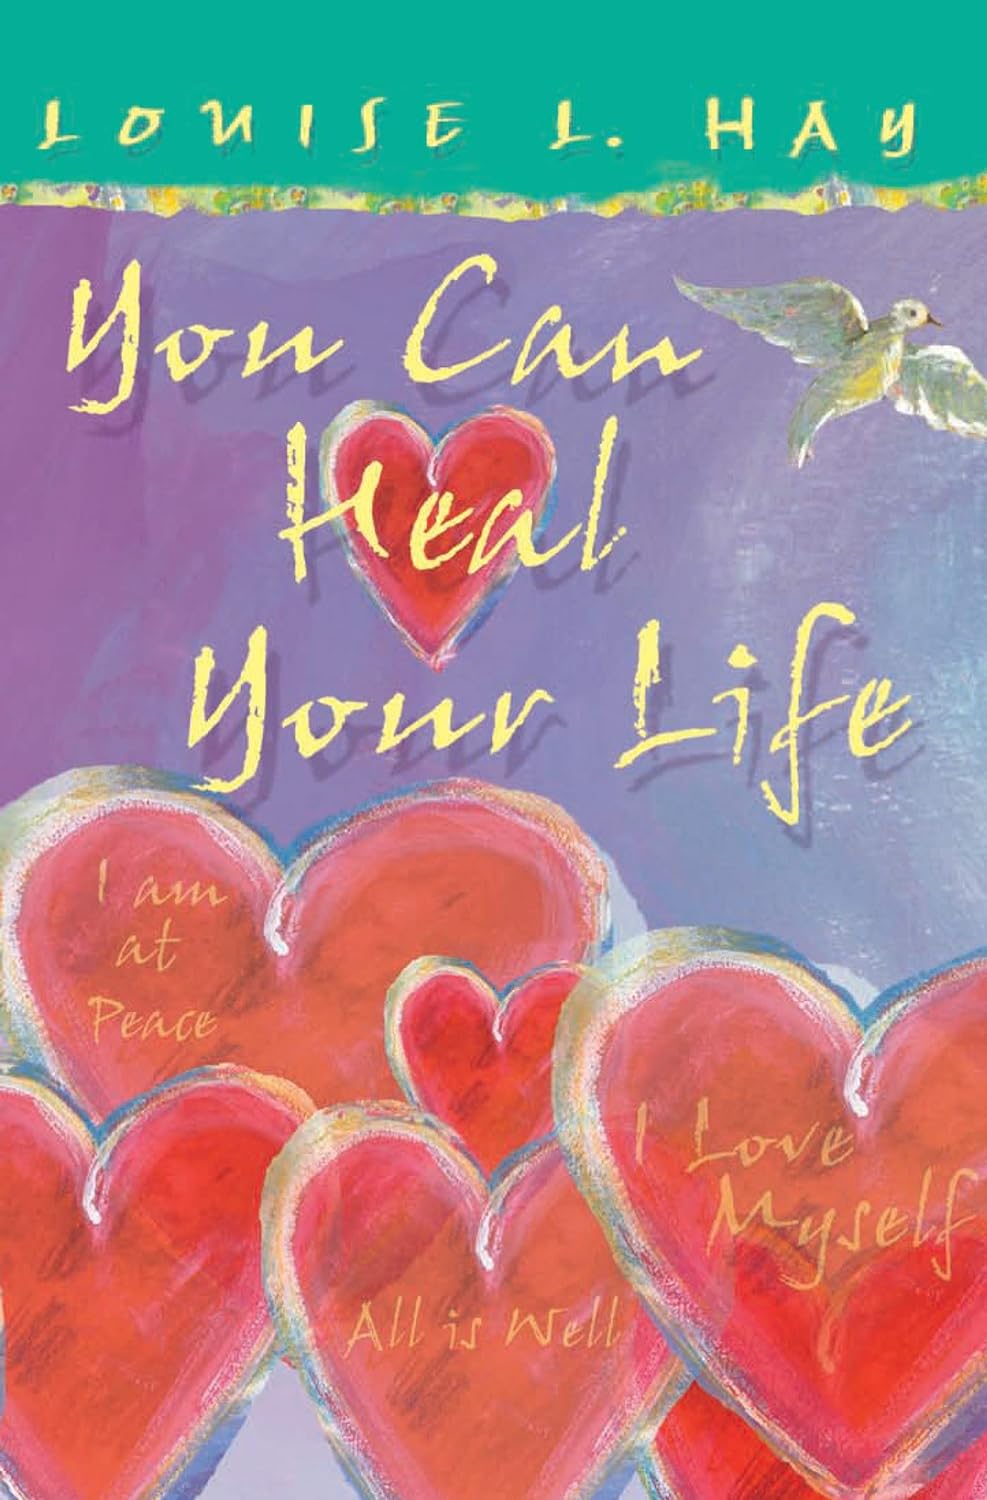 PRELOVED You Can Heal Your Life (gift Edition) - Louise L Hay